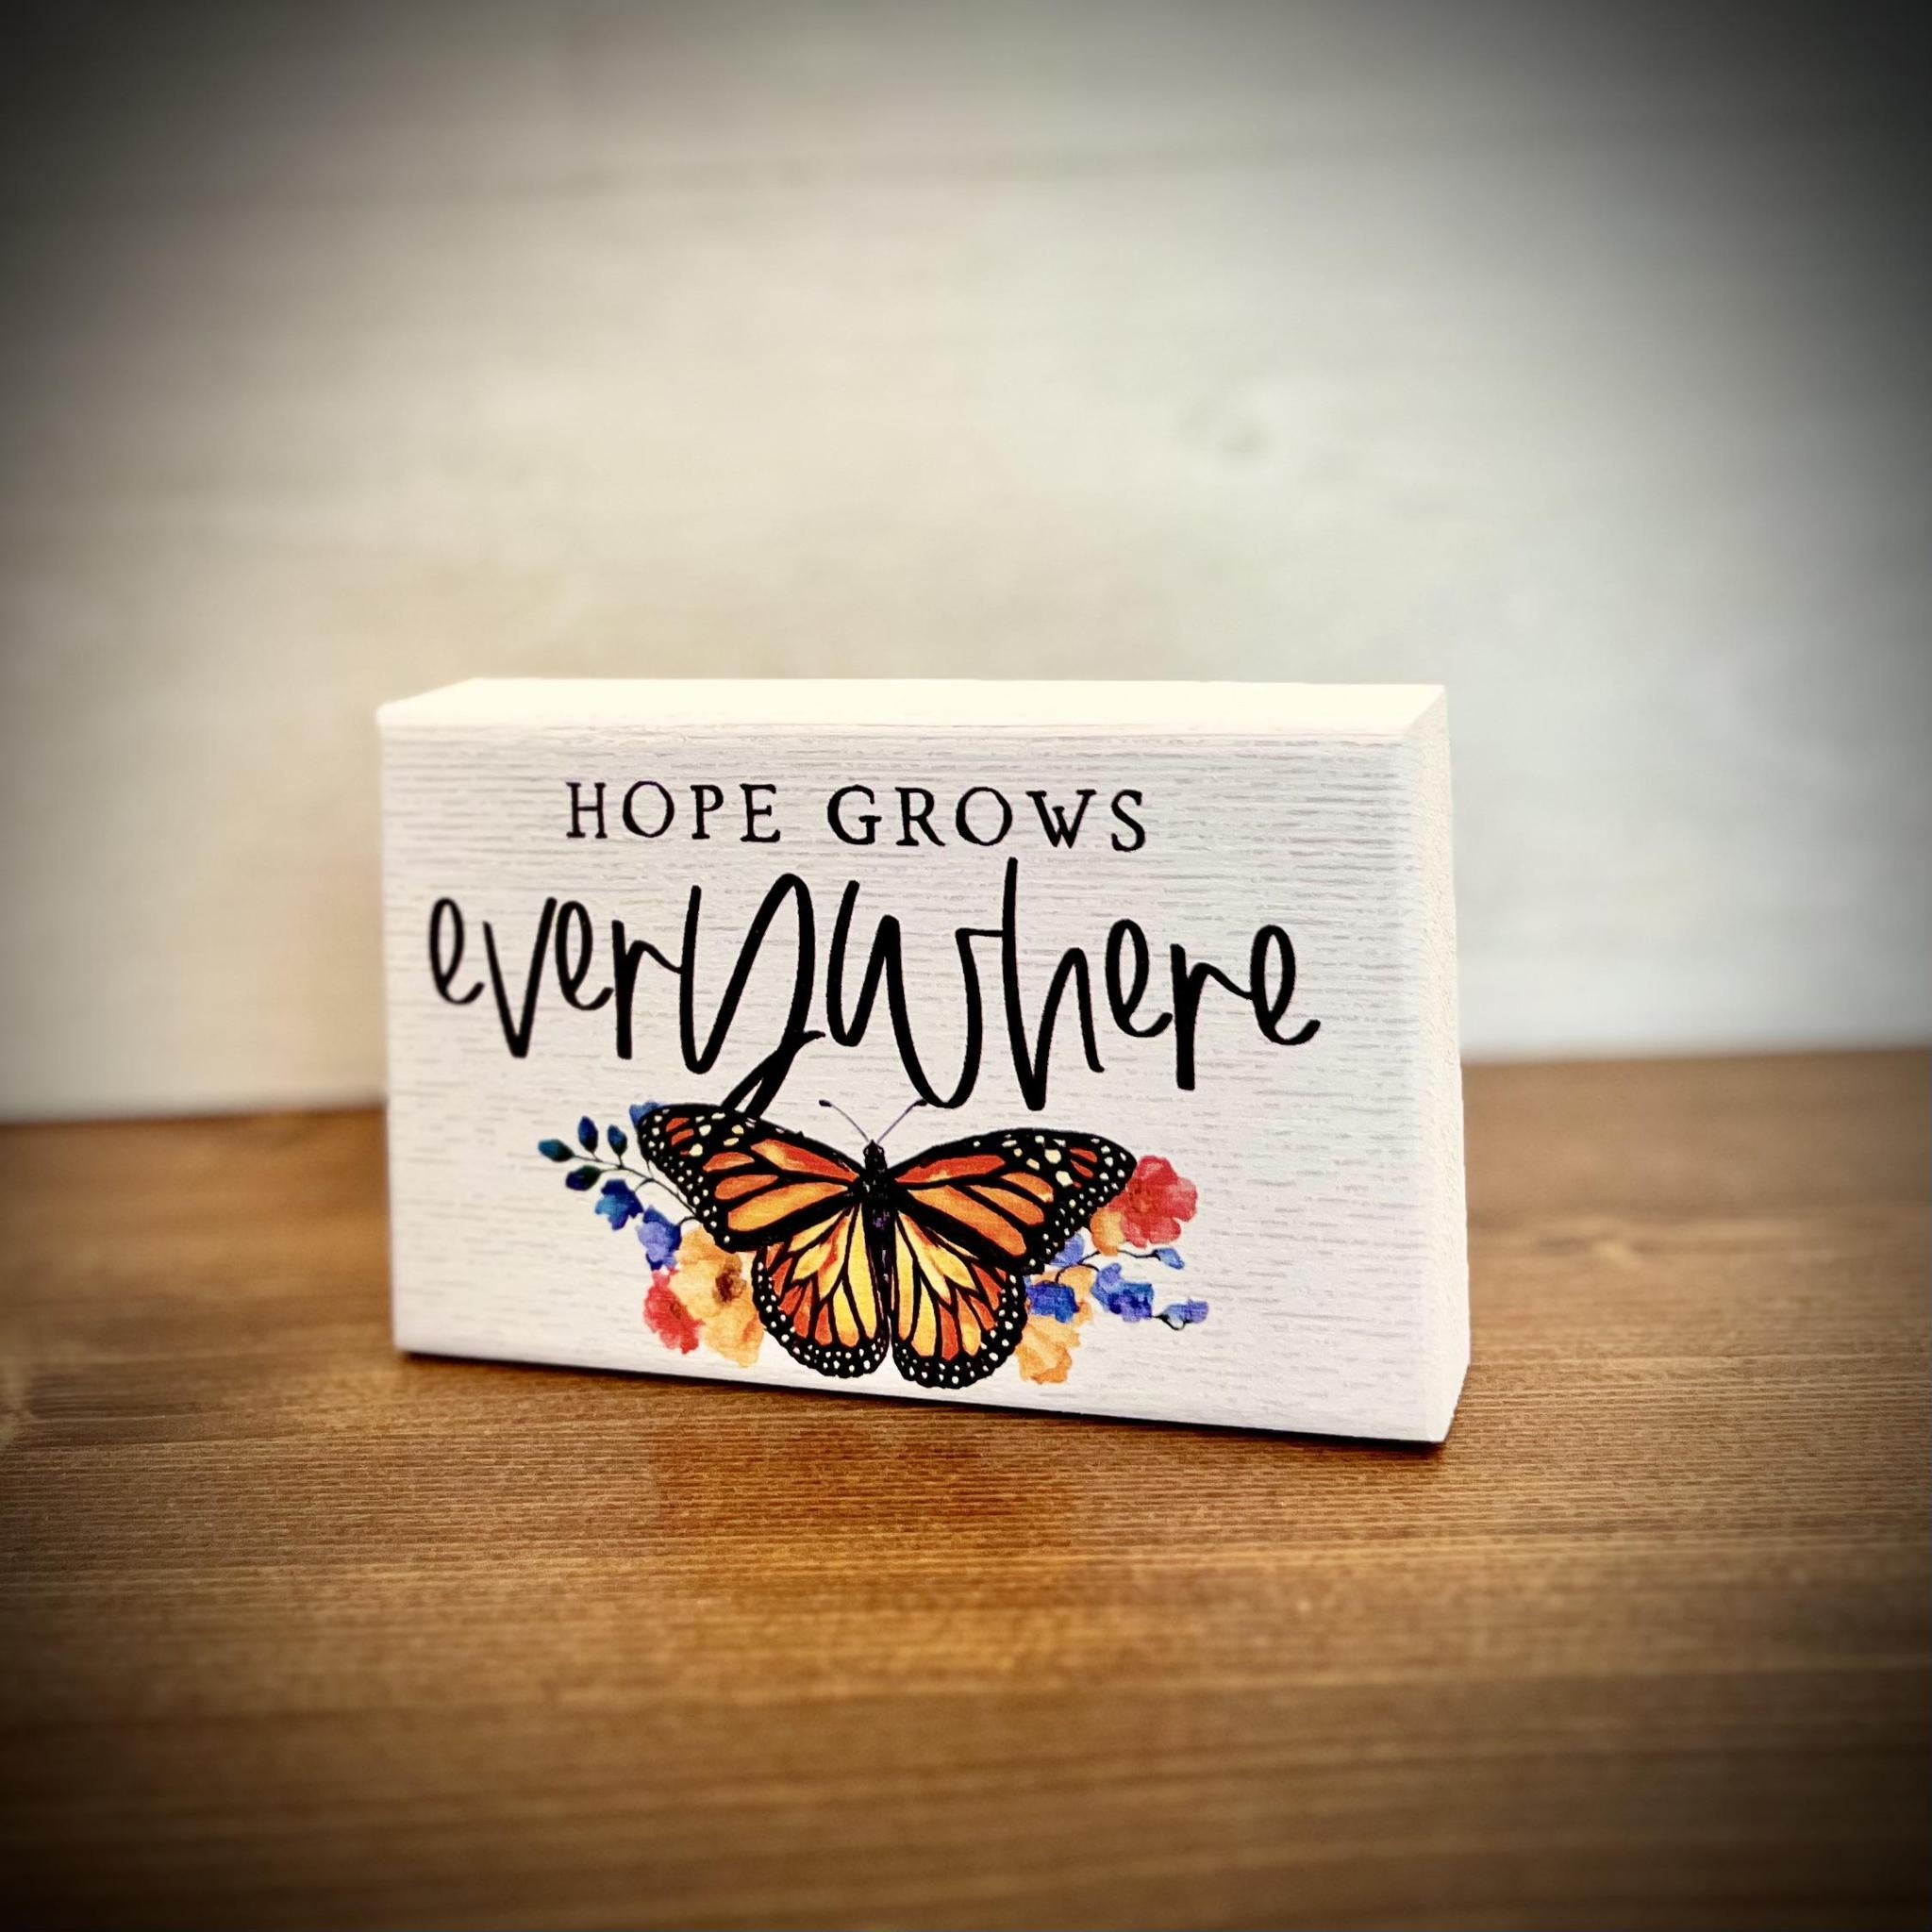 Hope Grows Butterfly - 5.25"L x 3.5"H